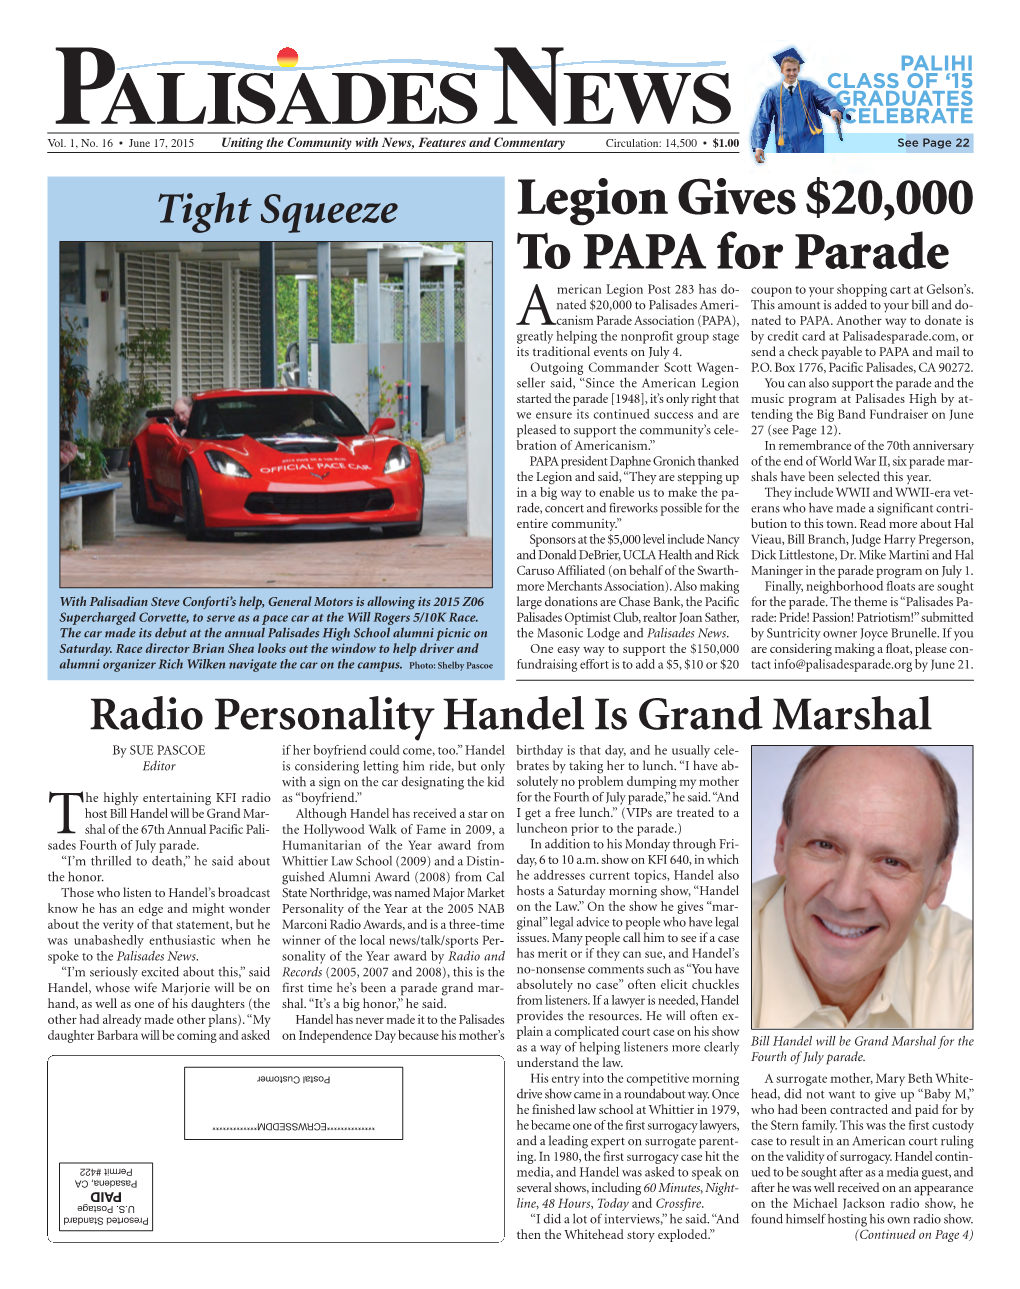 Legion Gives $20,000 to PAPA for Parade Merican Legion Post 283 Has Do- Coupon to Your Shopping Cart at Gelson’S